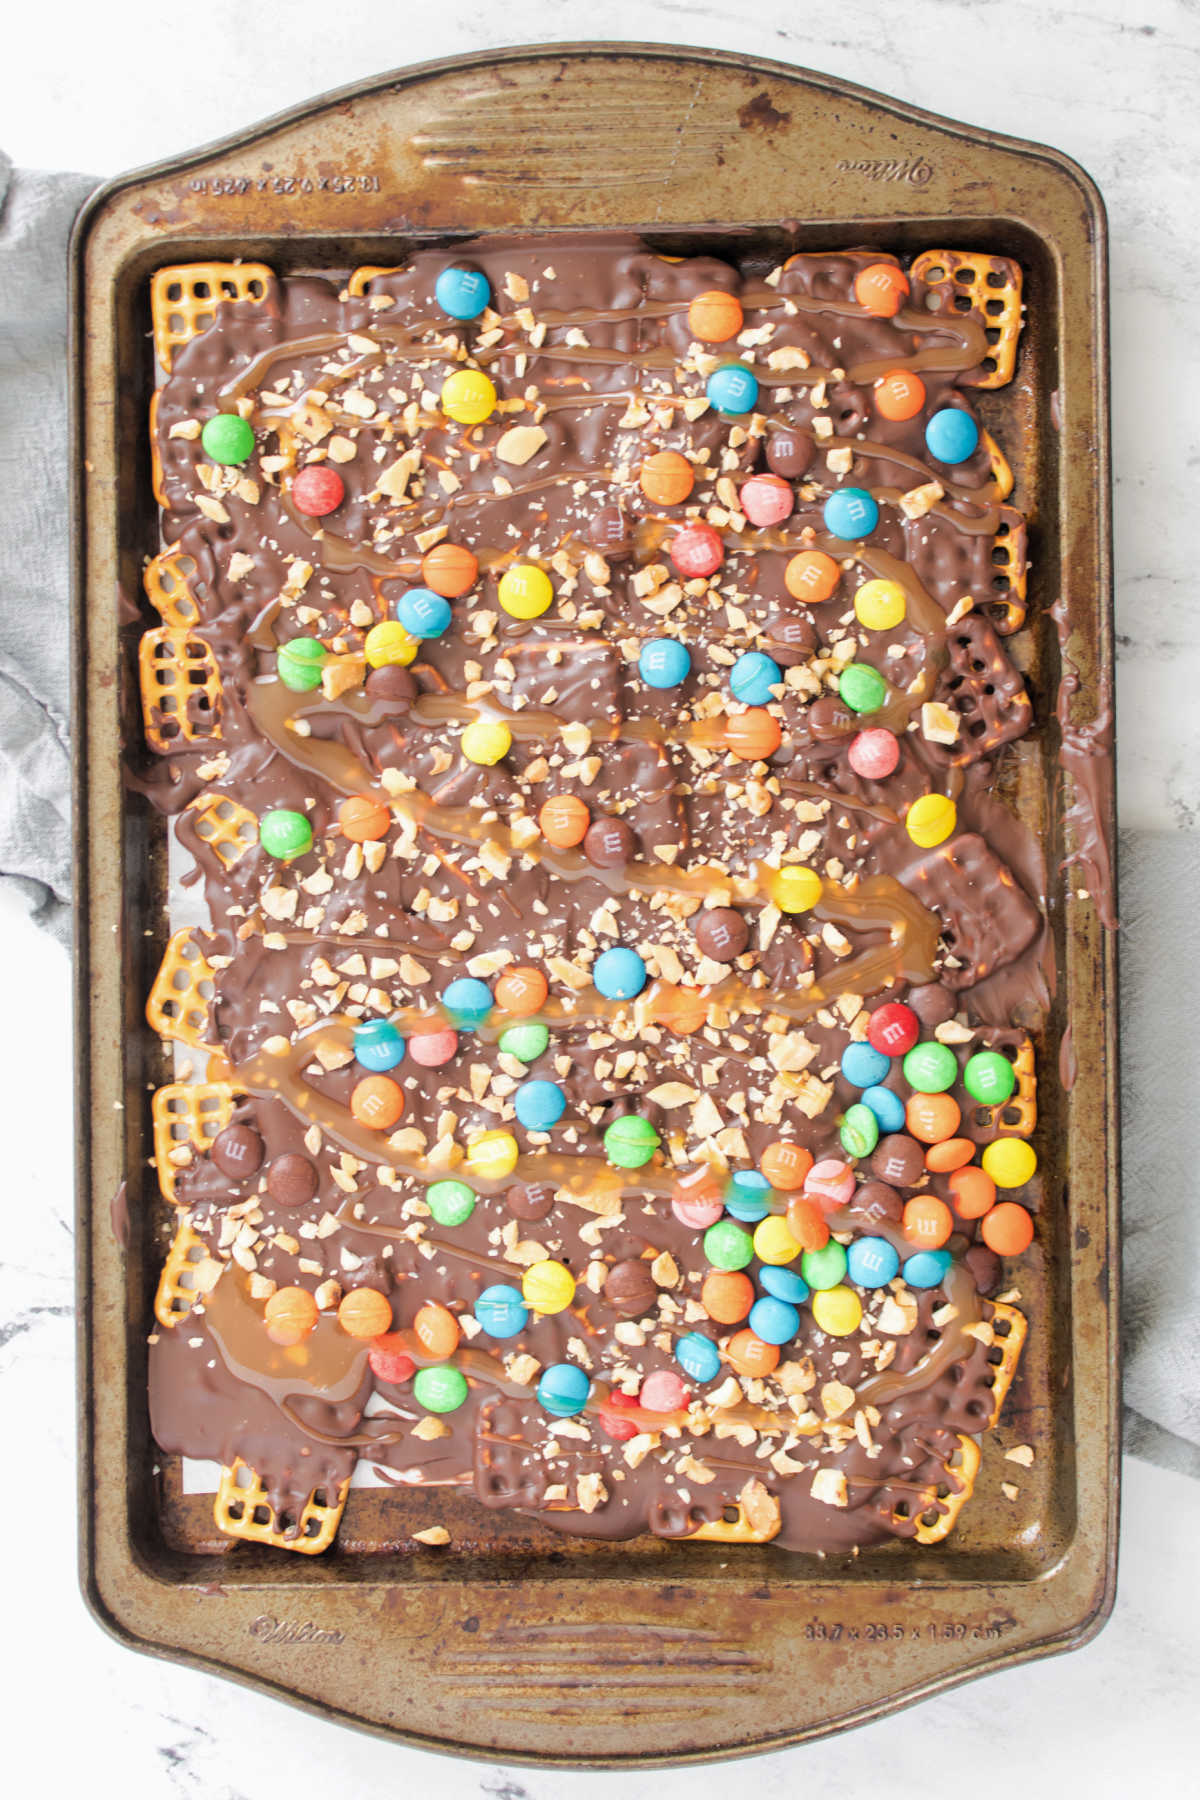 Pan of chocolate bark with pretzels, caramel, chopped peanuts and colorful m&m's. 